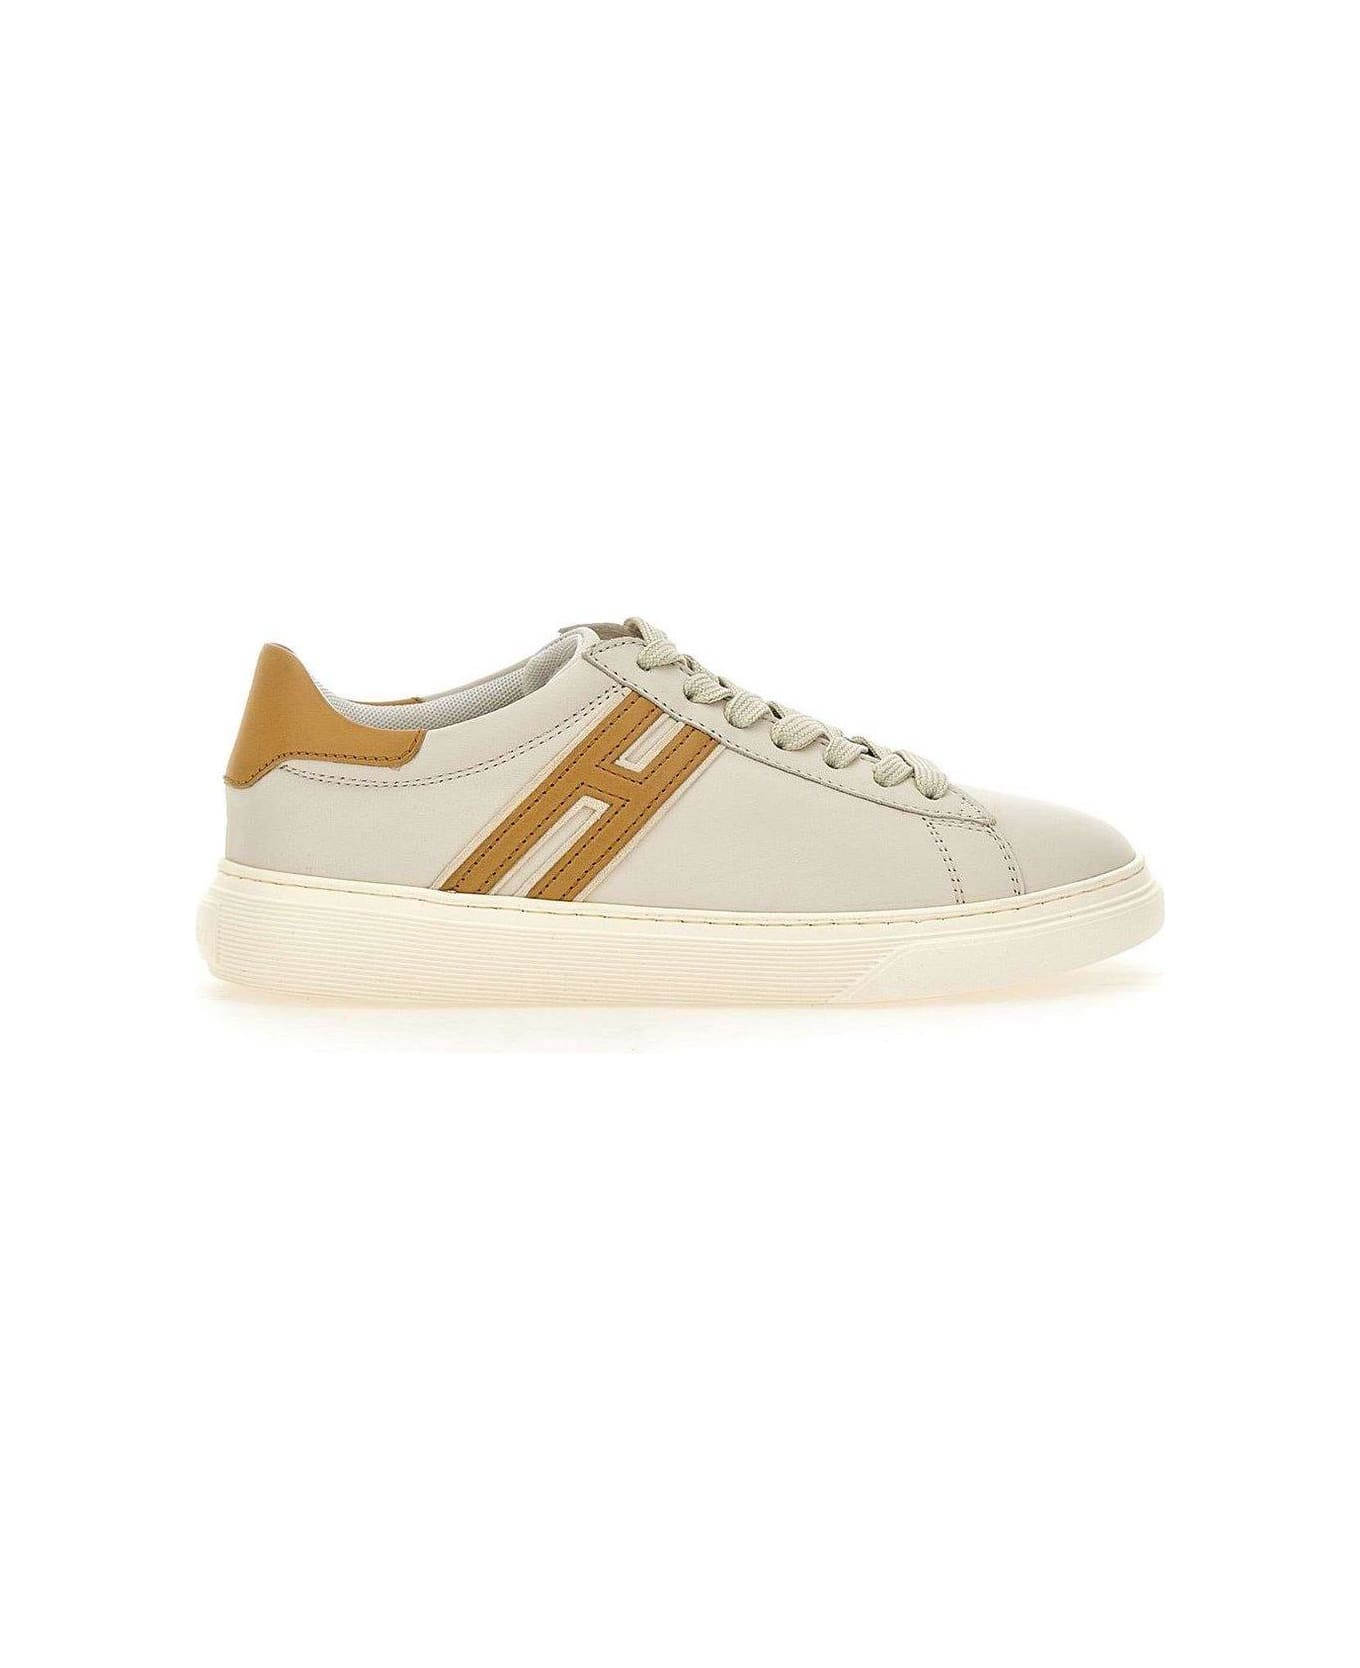 Hogan Sneakers "h365" Made Of Leather - WHITE/ Brown スニーカー